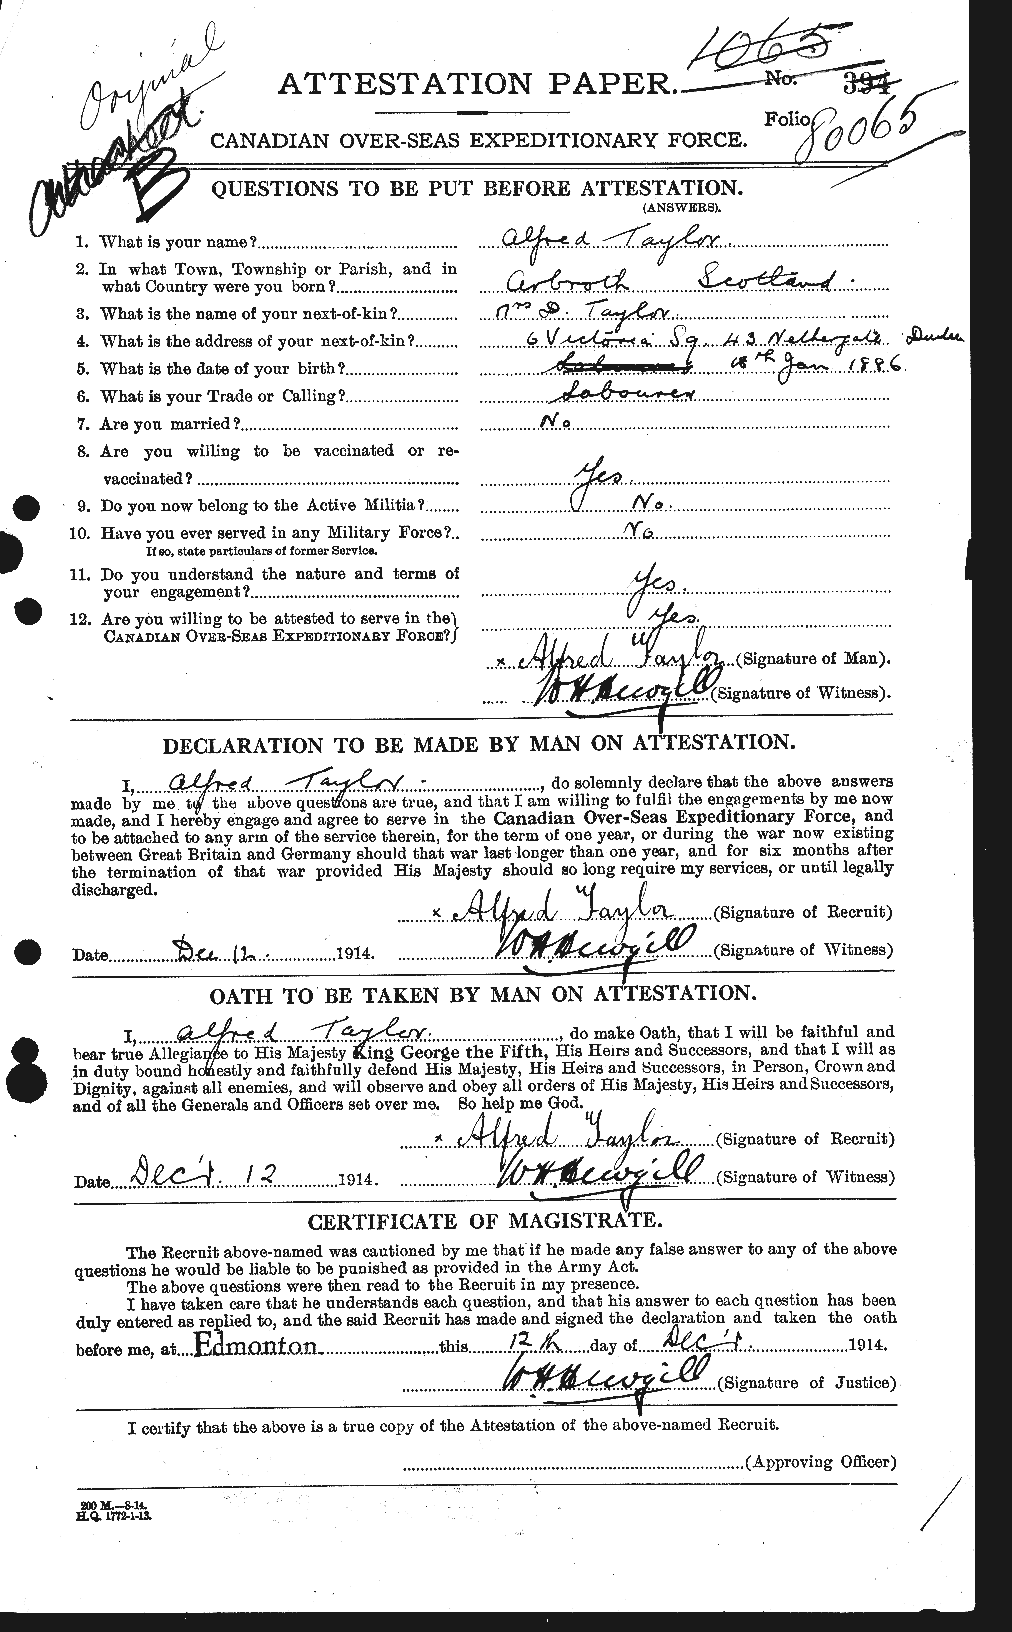 Personnel Records of the First World War - CEF 626174a